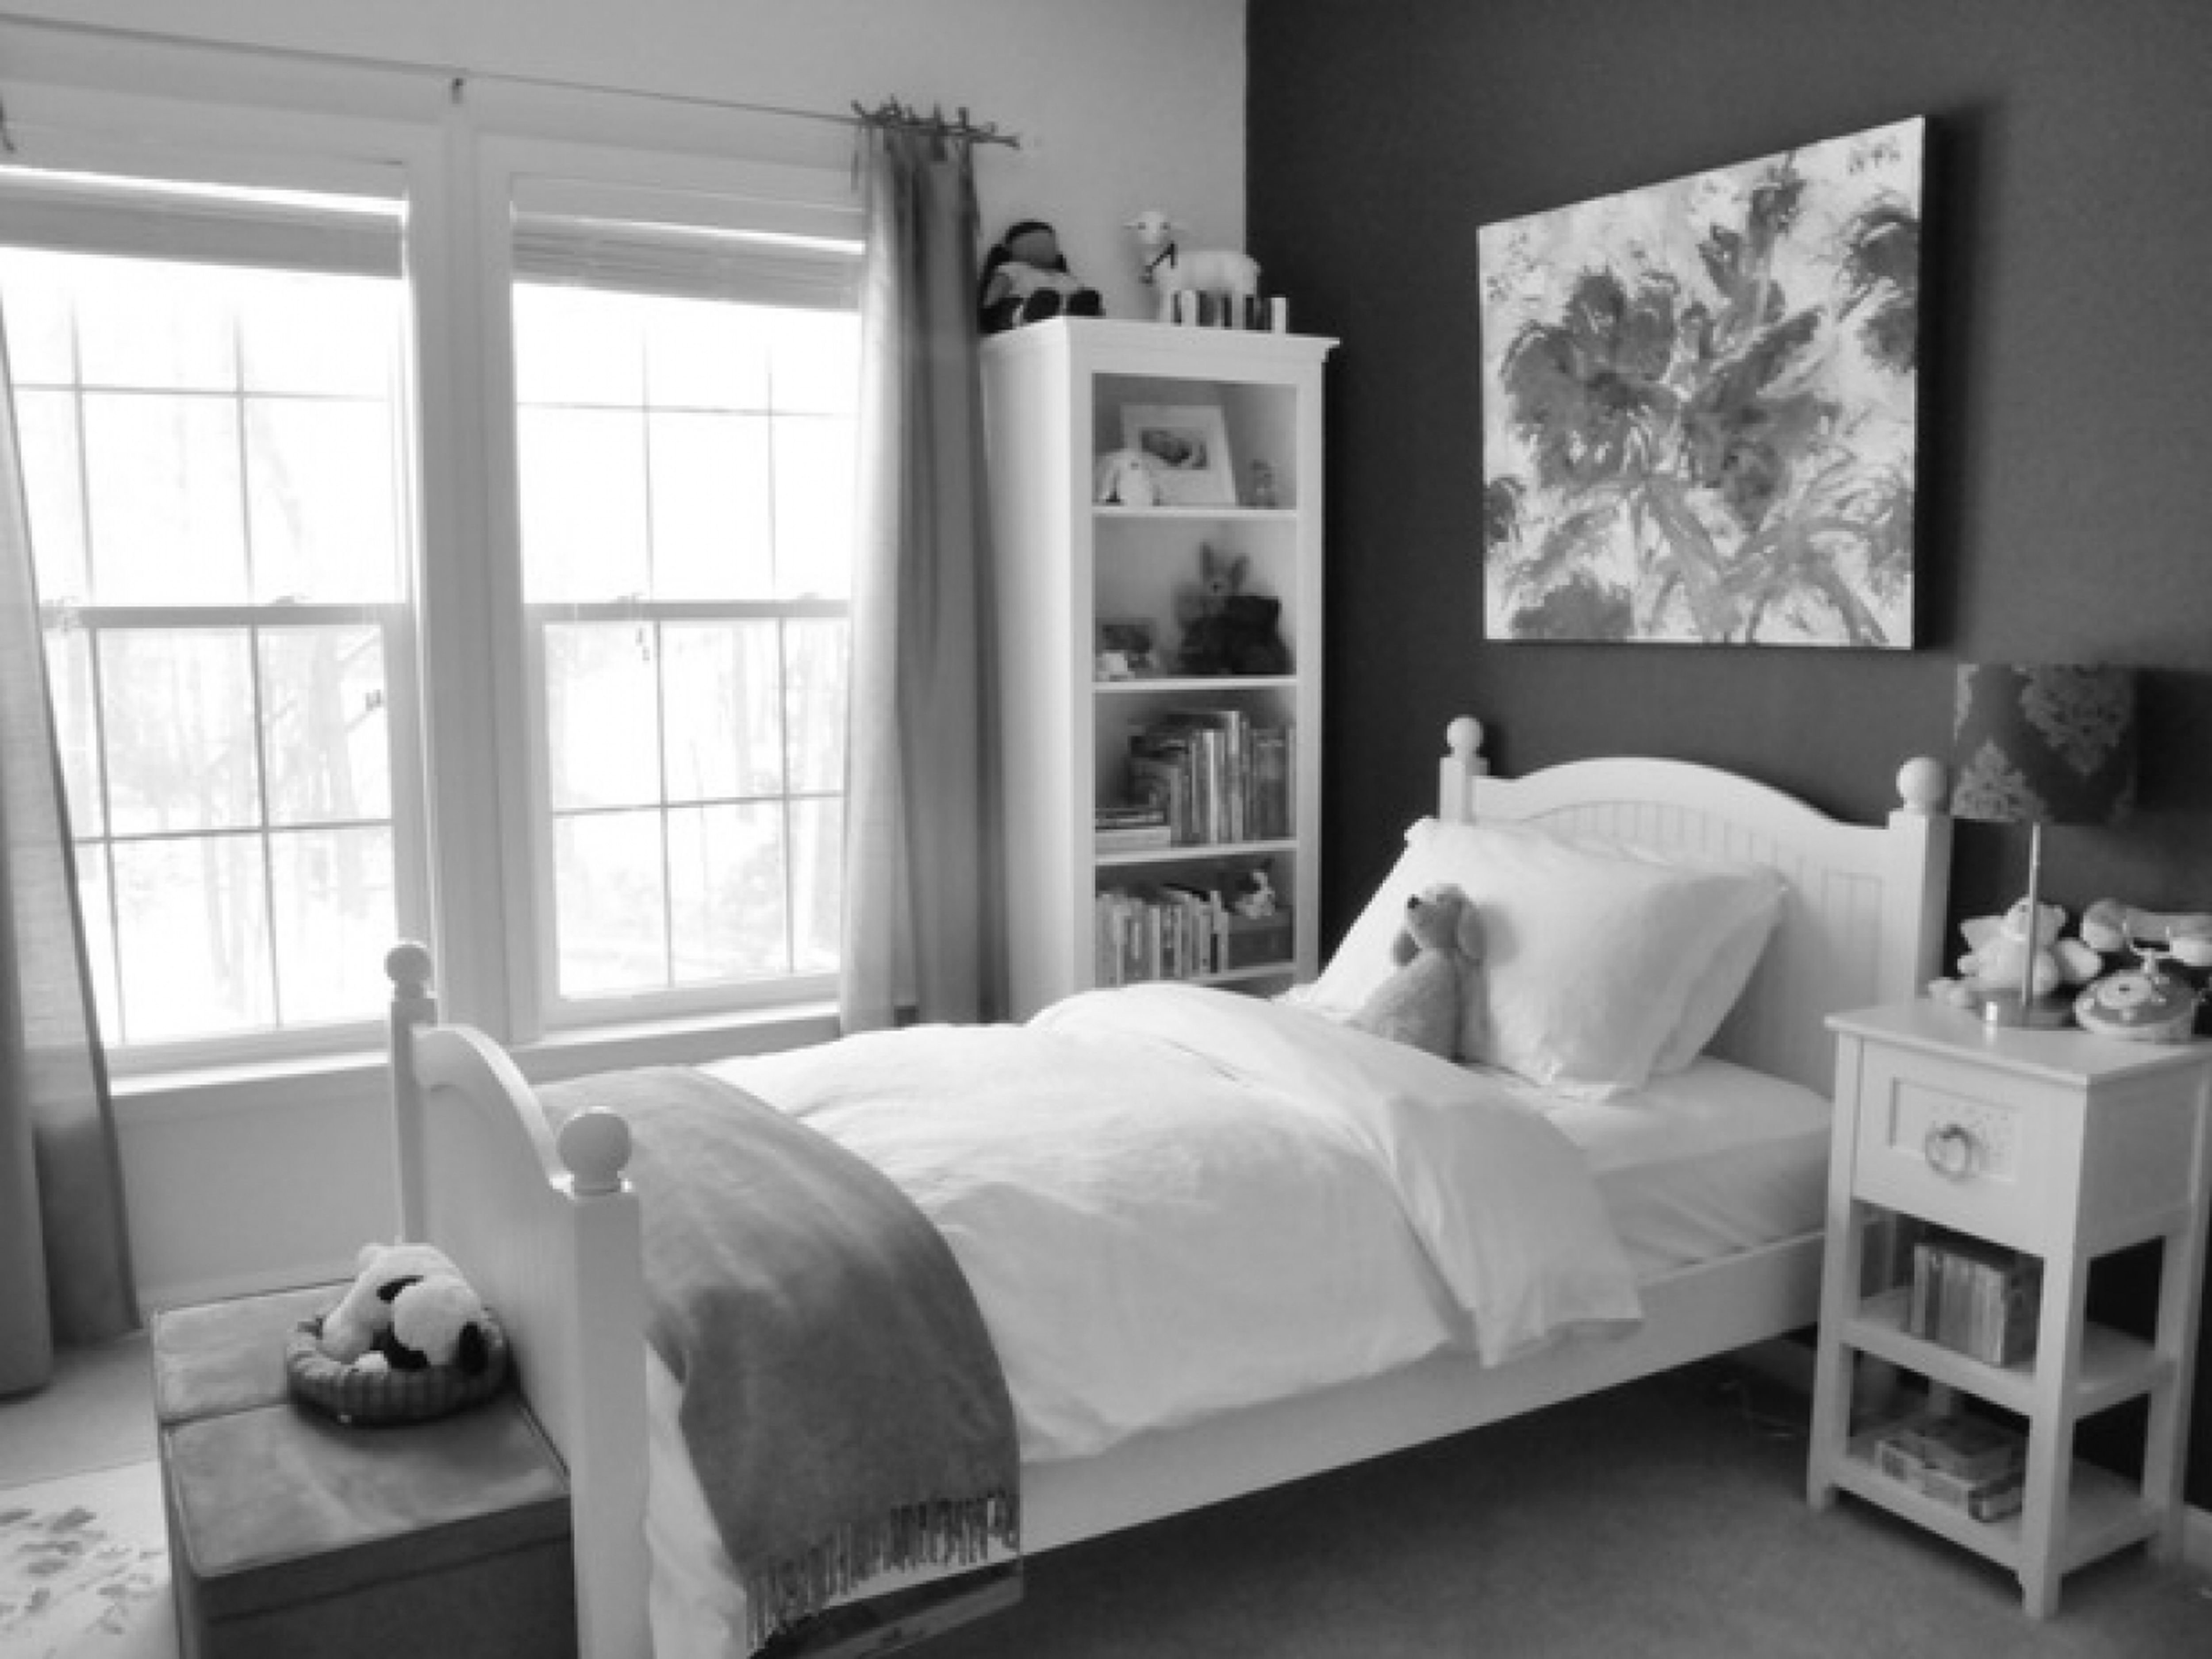 Cheap Do It Yourself Bedroom Decorating Ideas